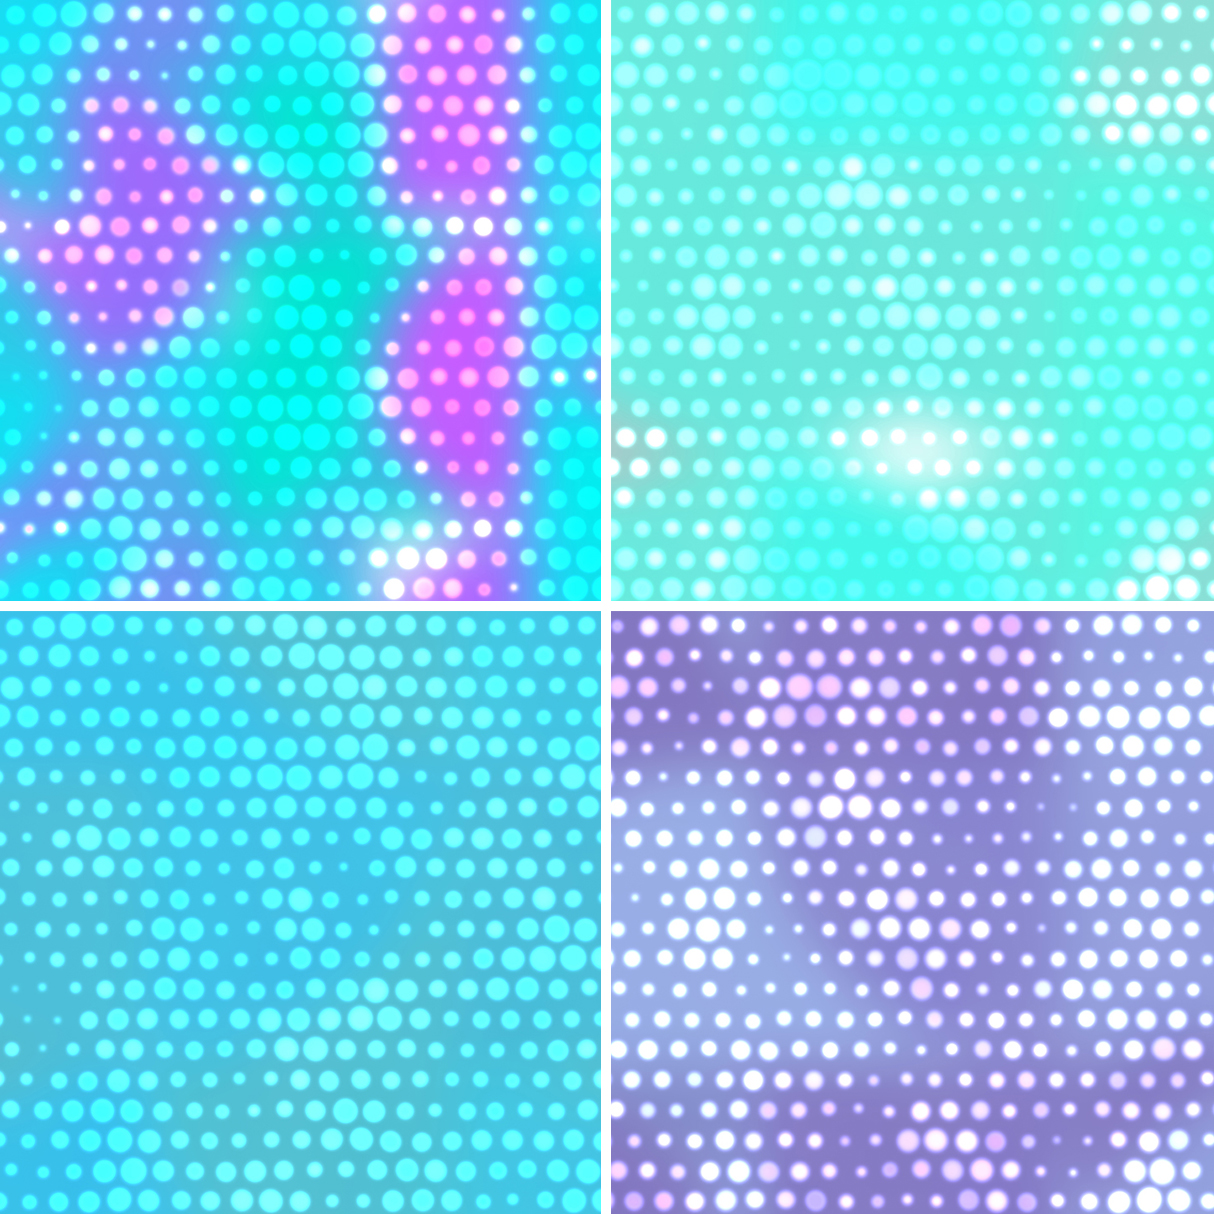 50 Shining Dotty Backgrounds Samples Preview – Part 3